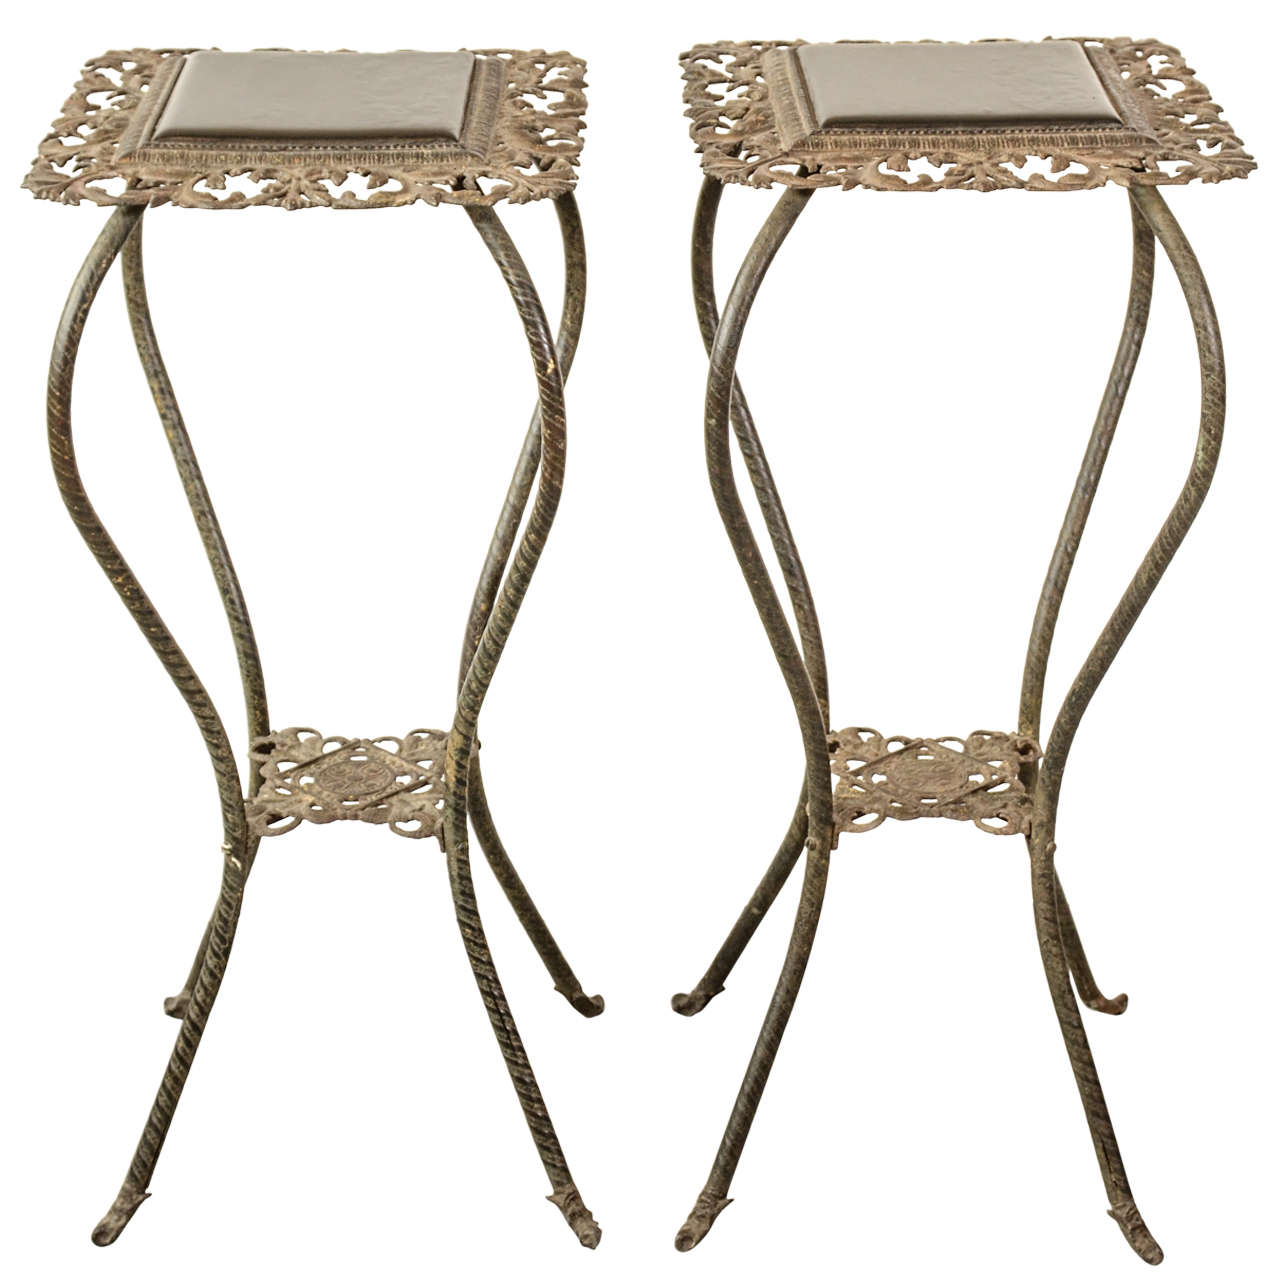 Pair of Iron Flower Stands